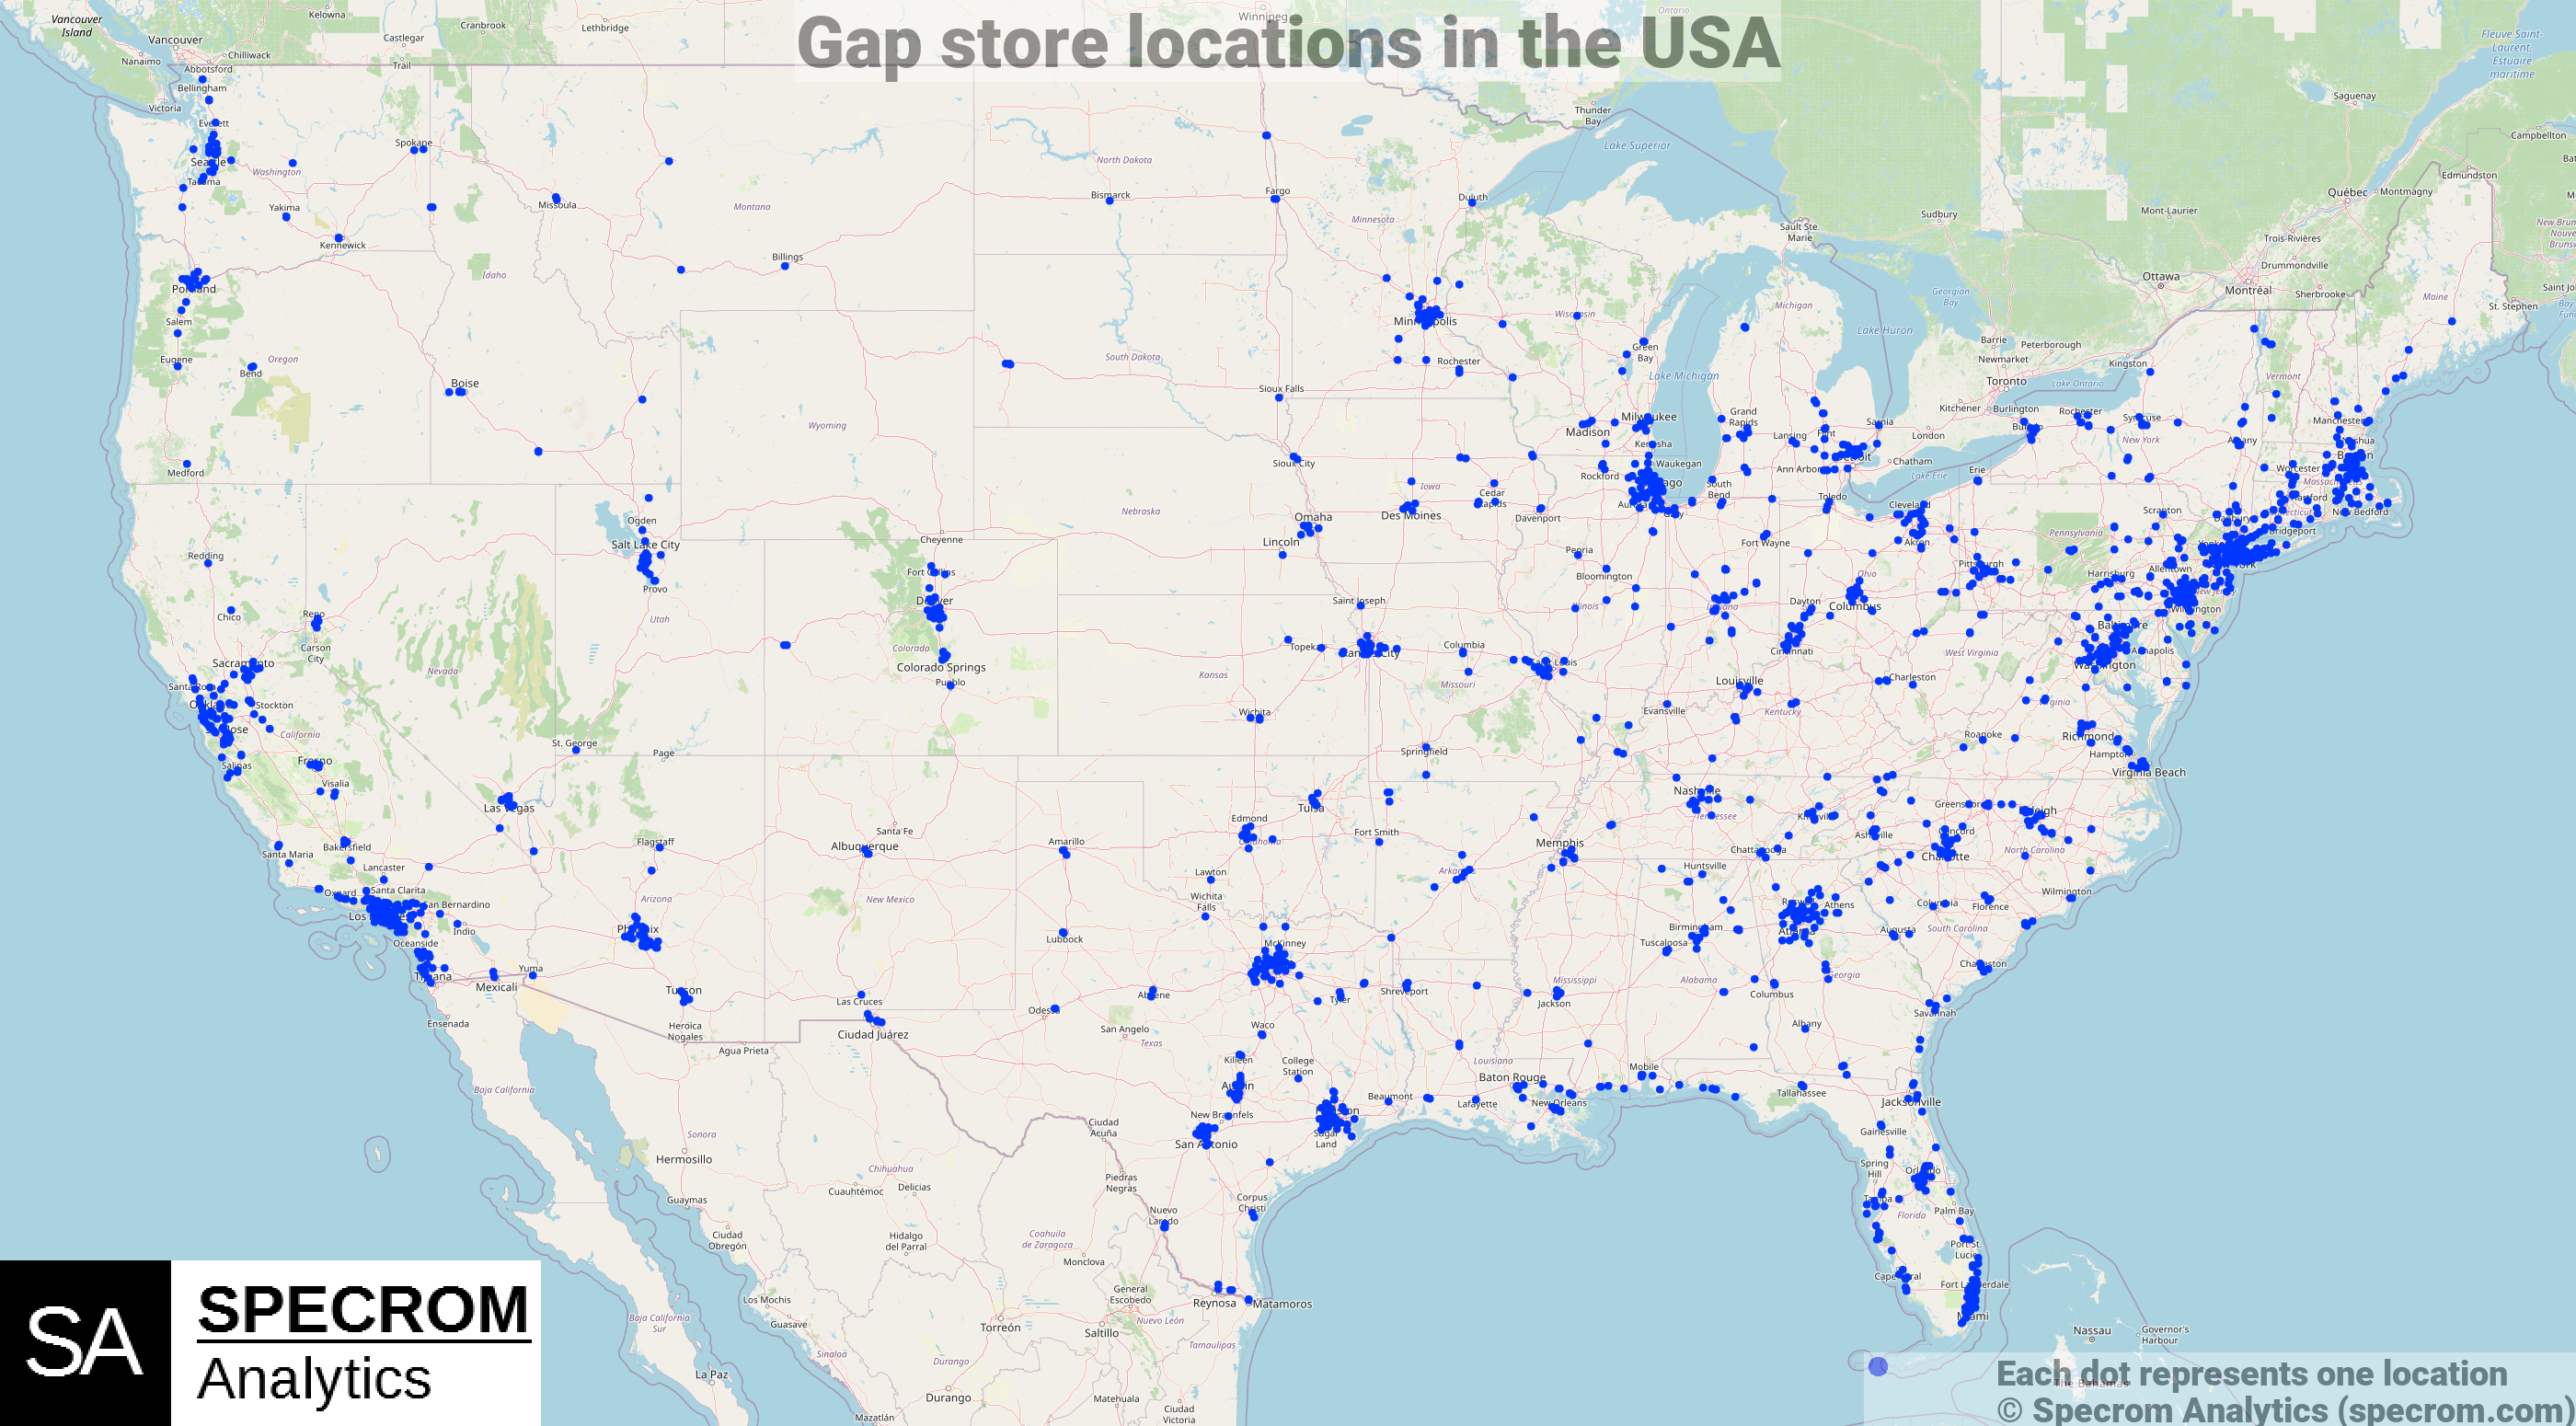 Gap store locations in the USA